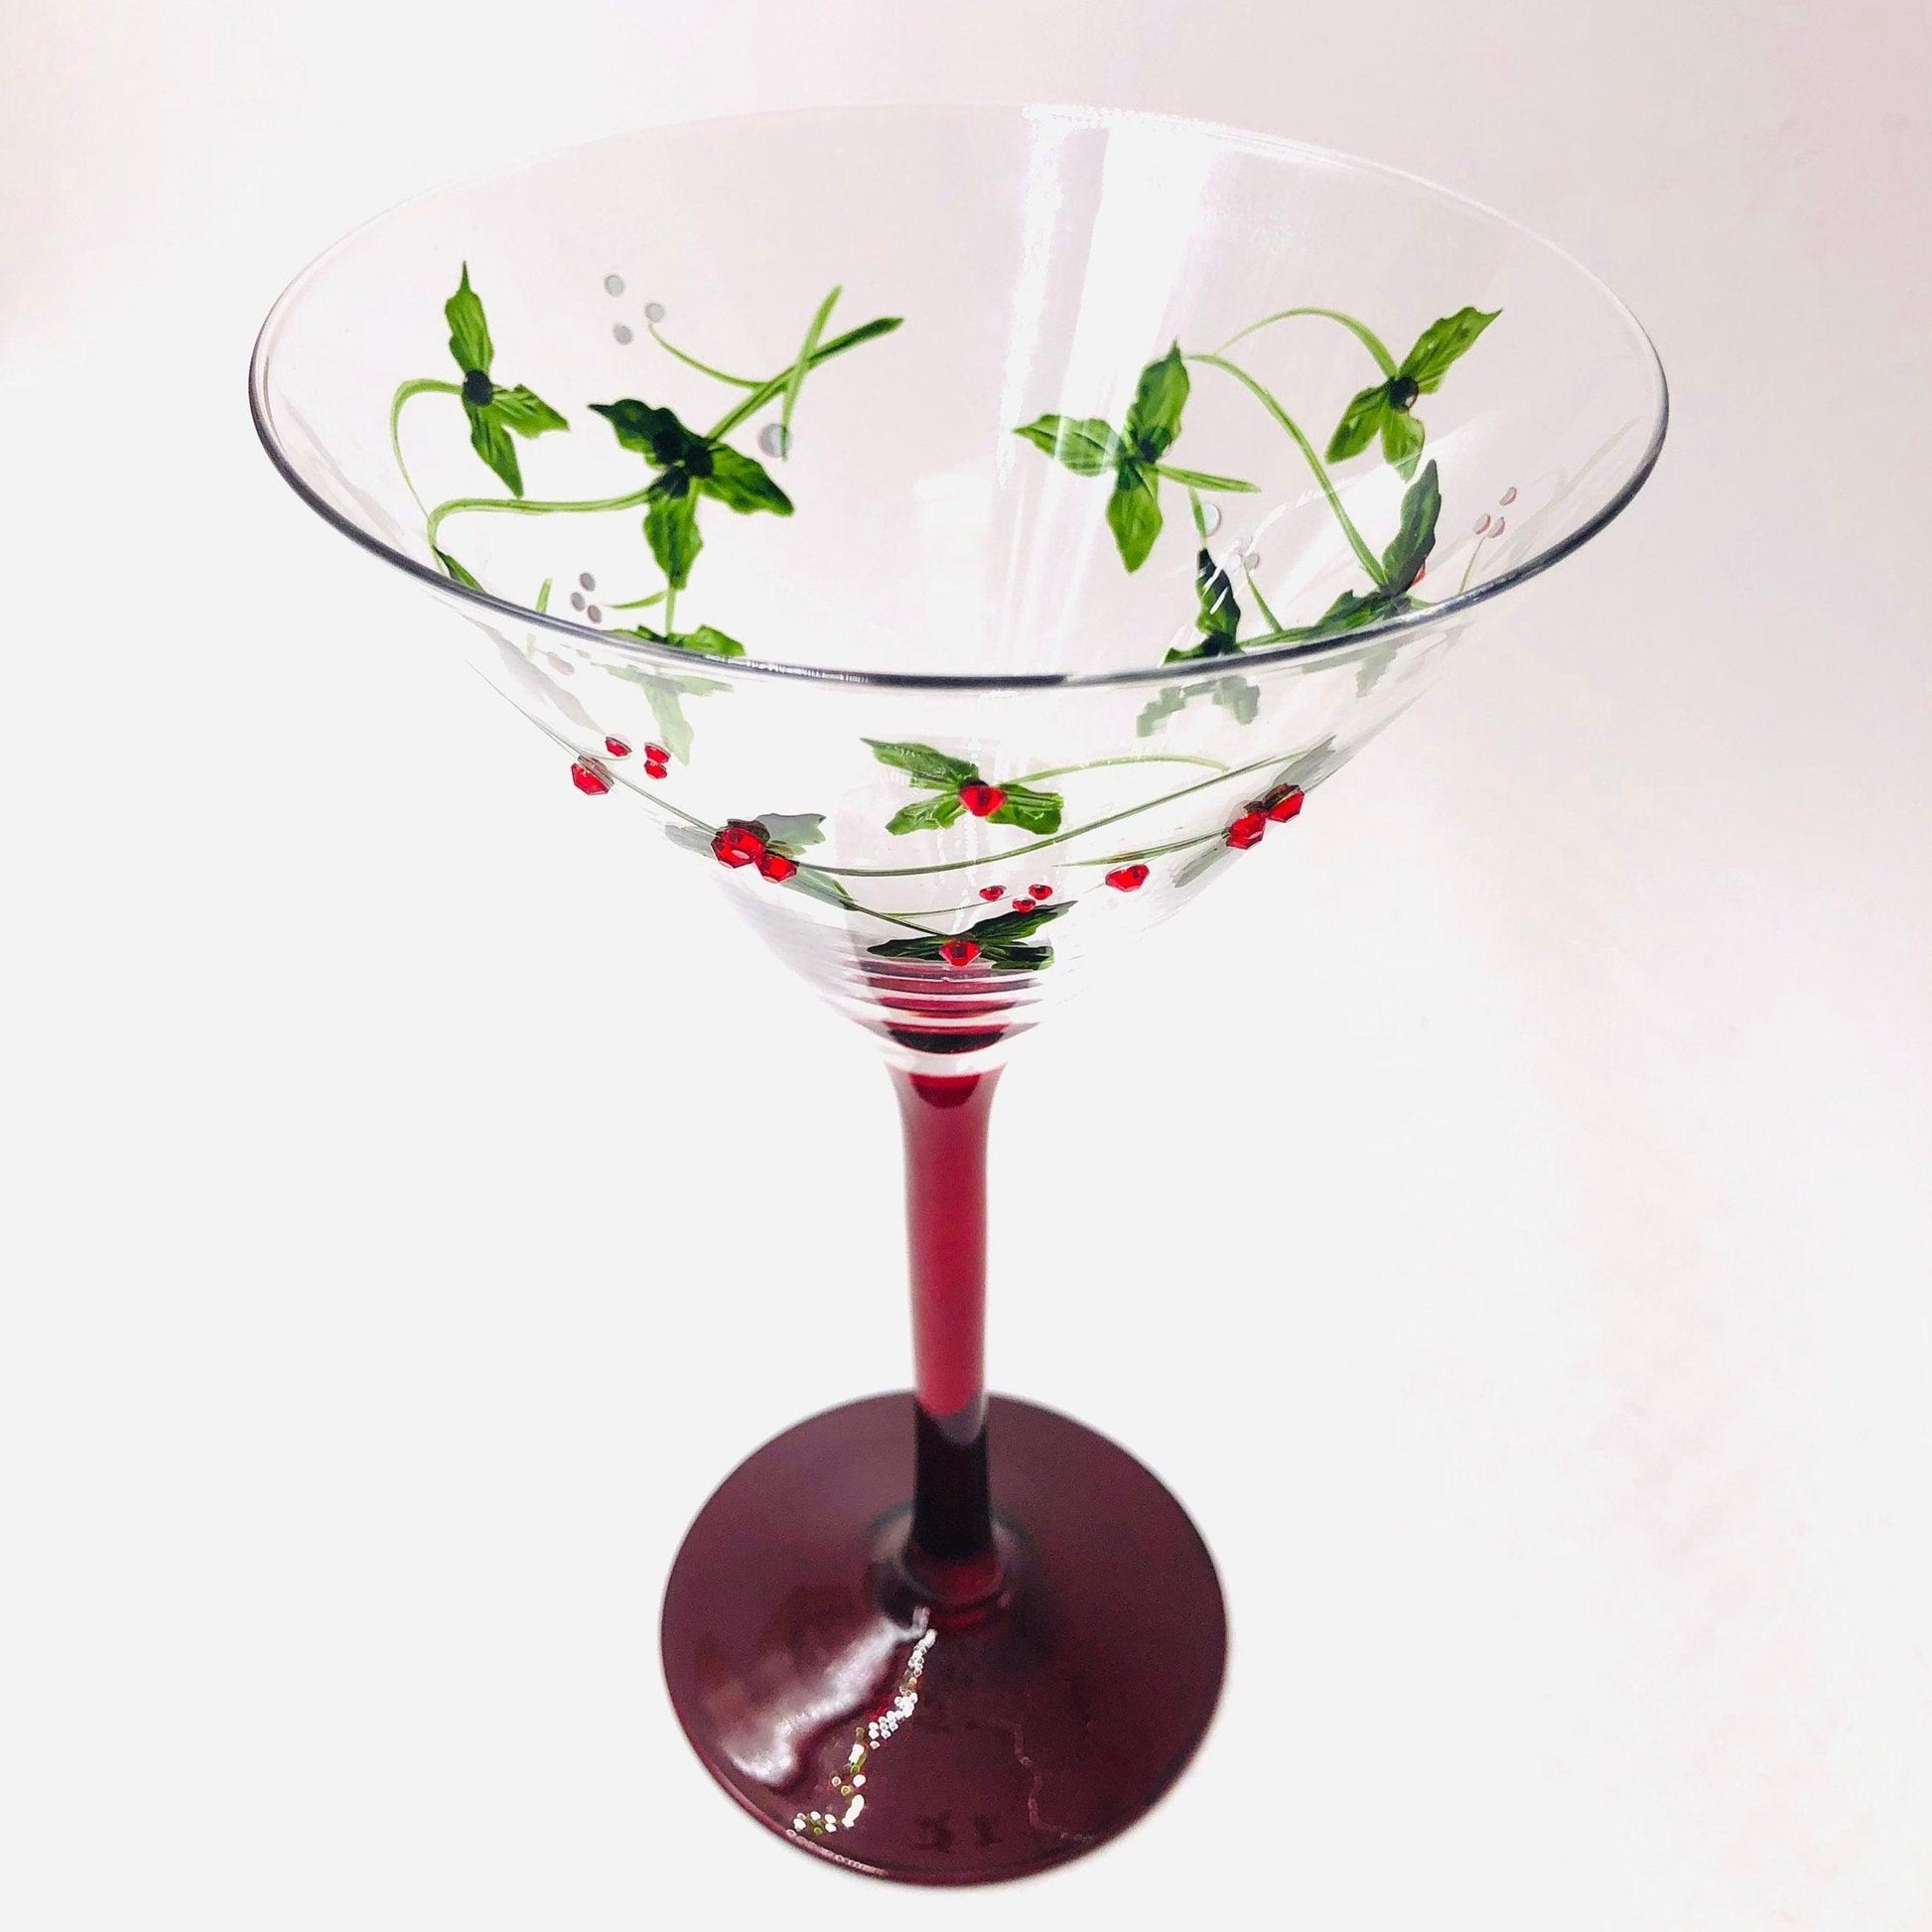 Pair of Funky Colorful Hand Painted Martini Glasses